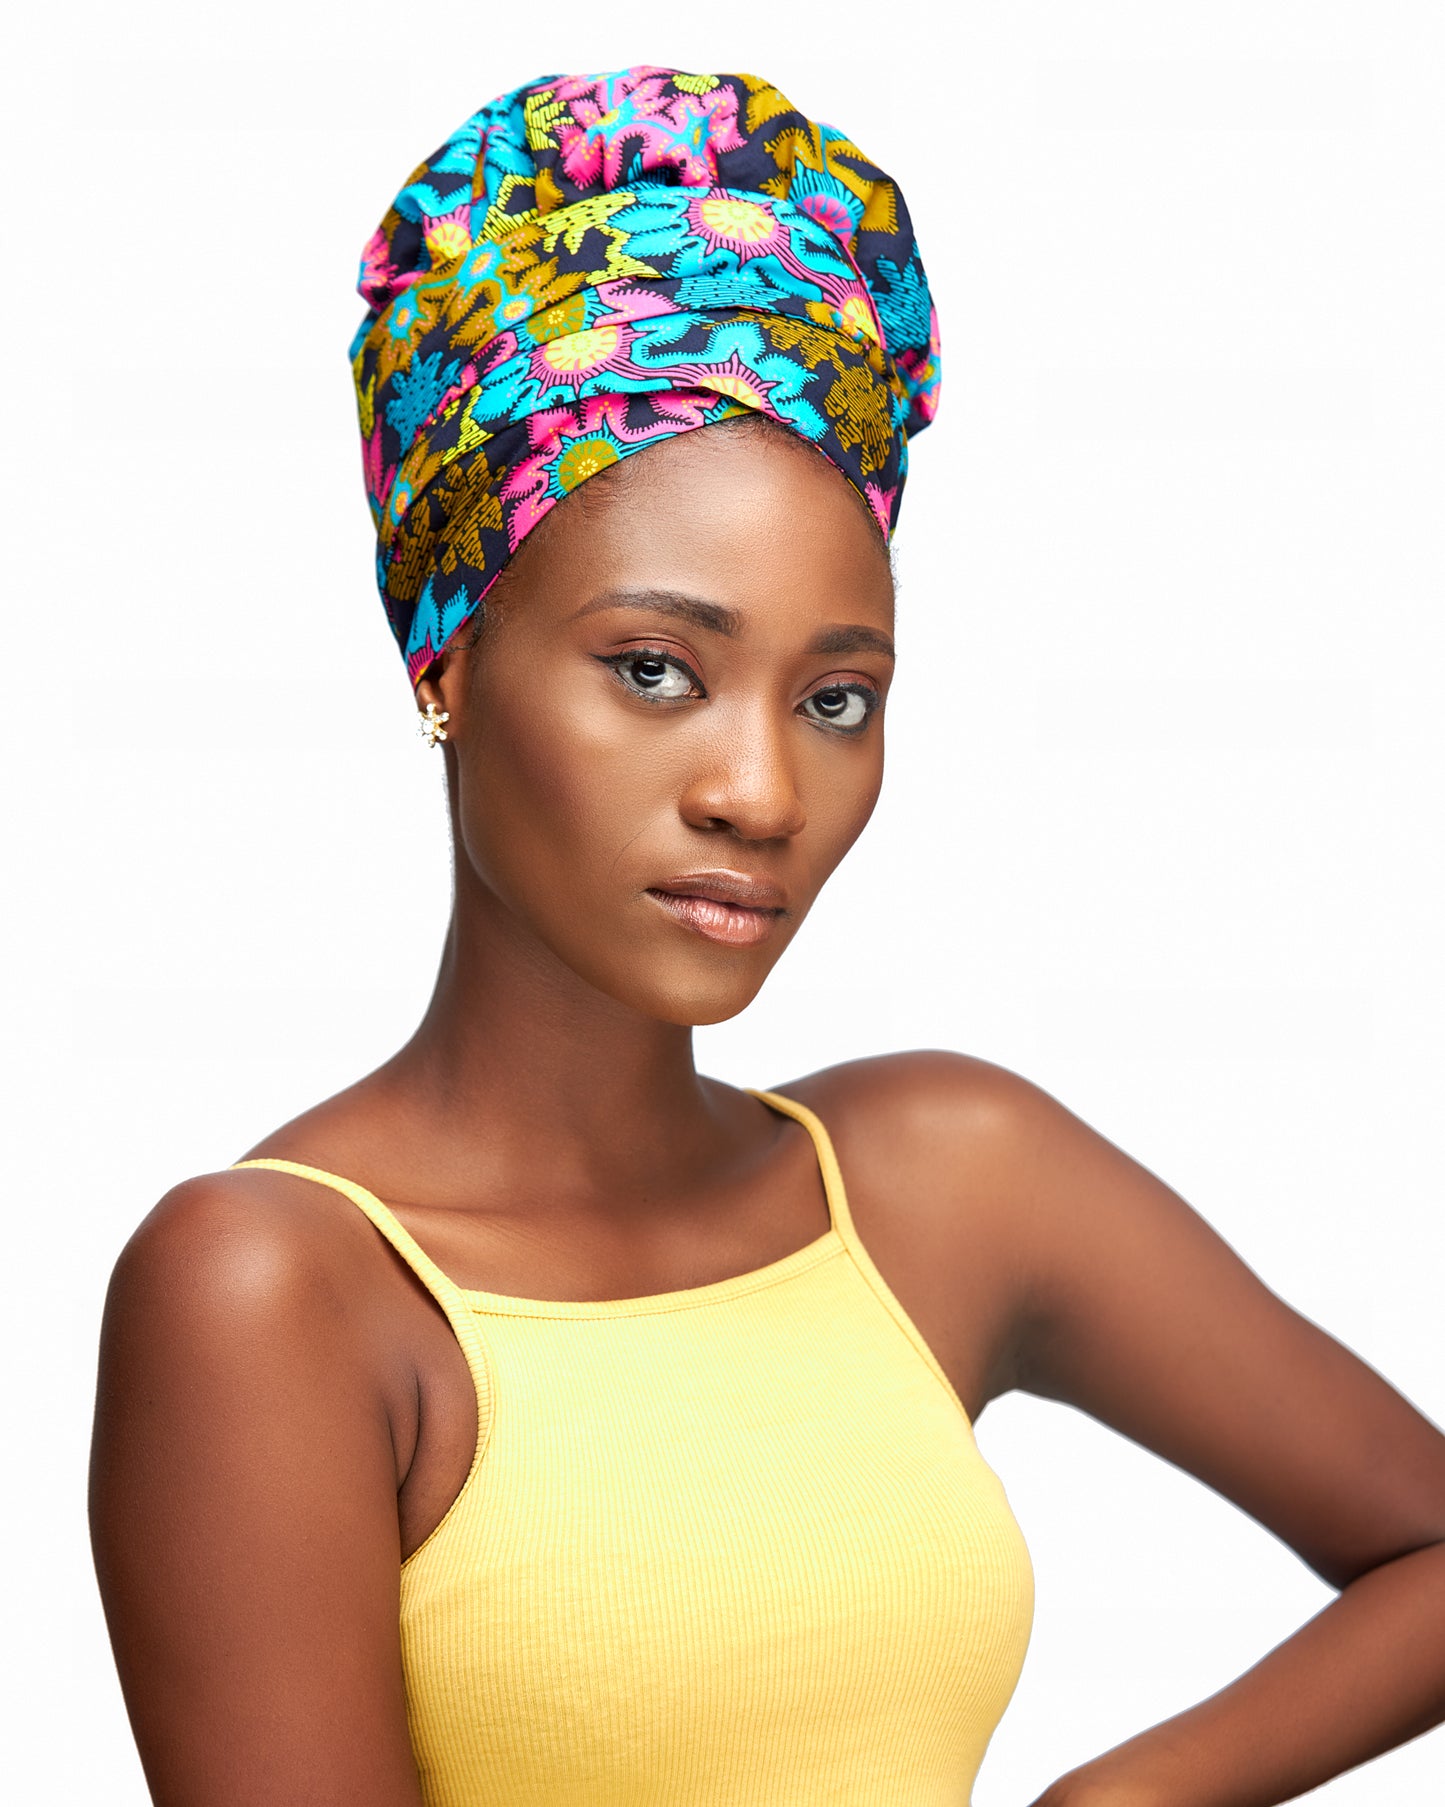 Ankara Wax Print Made of Yellow, Blue, Gold, And Pink Blend of Beautiful Colours And Pattern, Hand Made Elastic Silklined Bonnet With Band